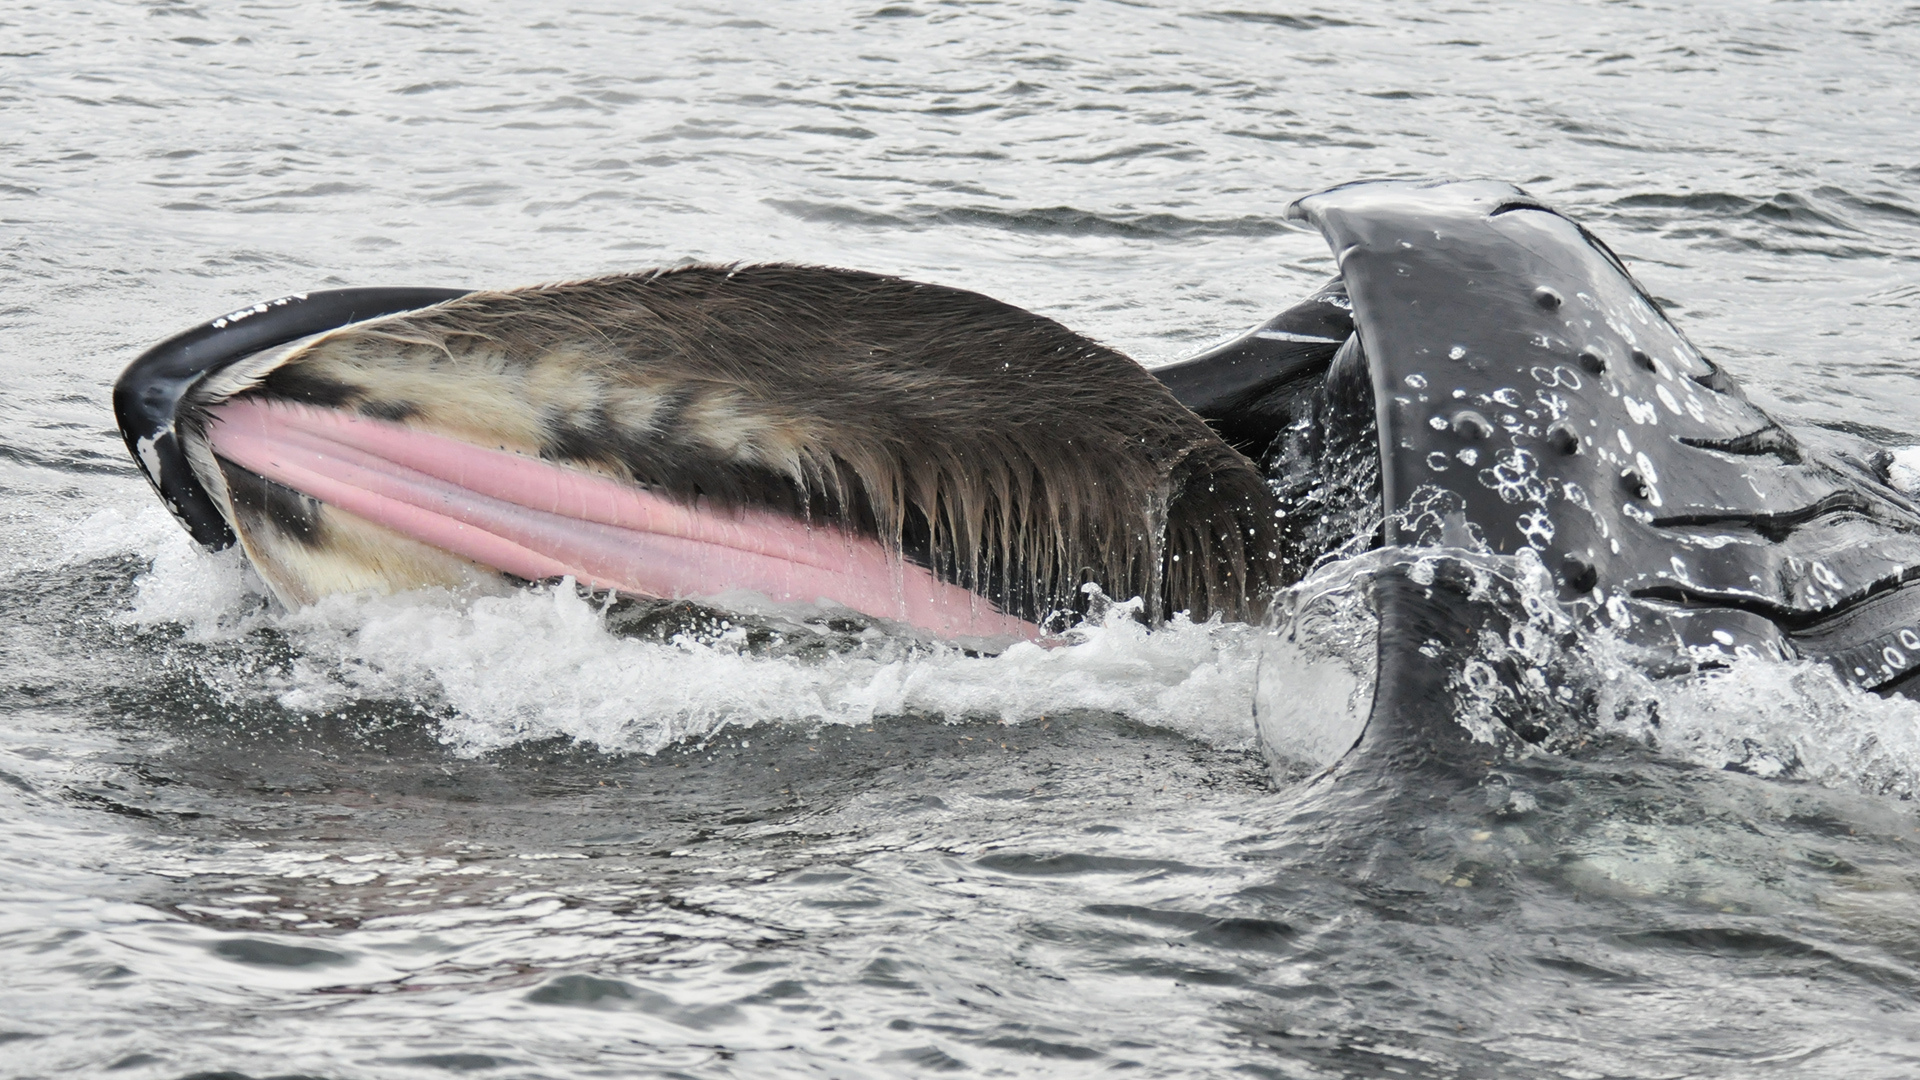 A humpback whale lunges across the water surface with its mouth agape. Its palate appears hairy with the exception of a strip of pink skin running down the middle.